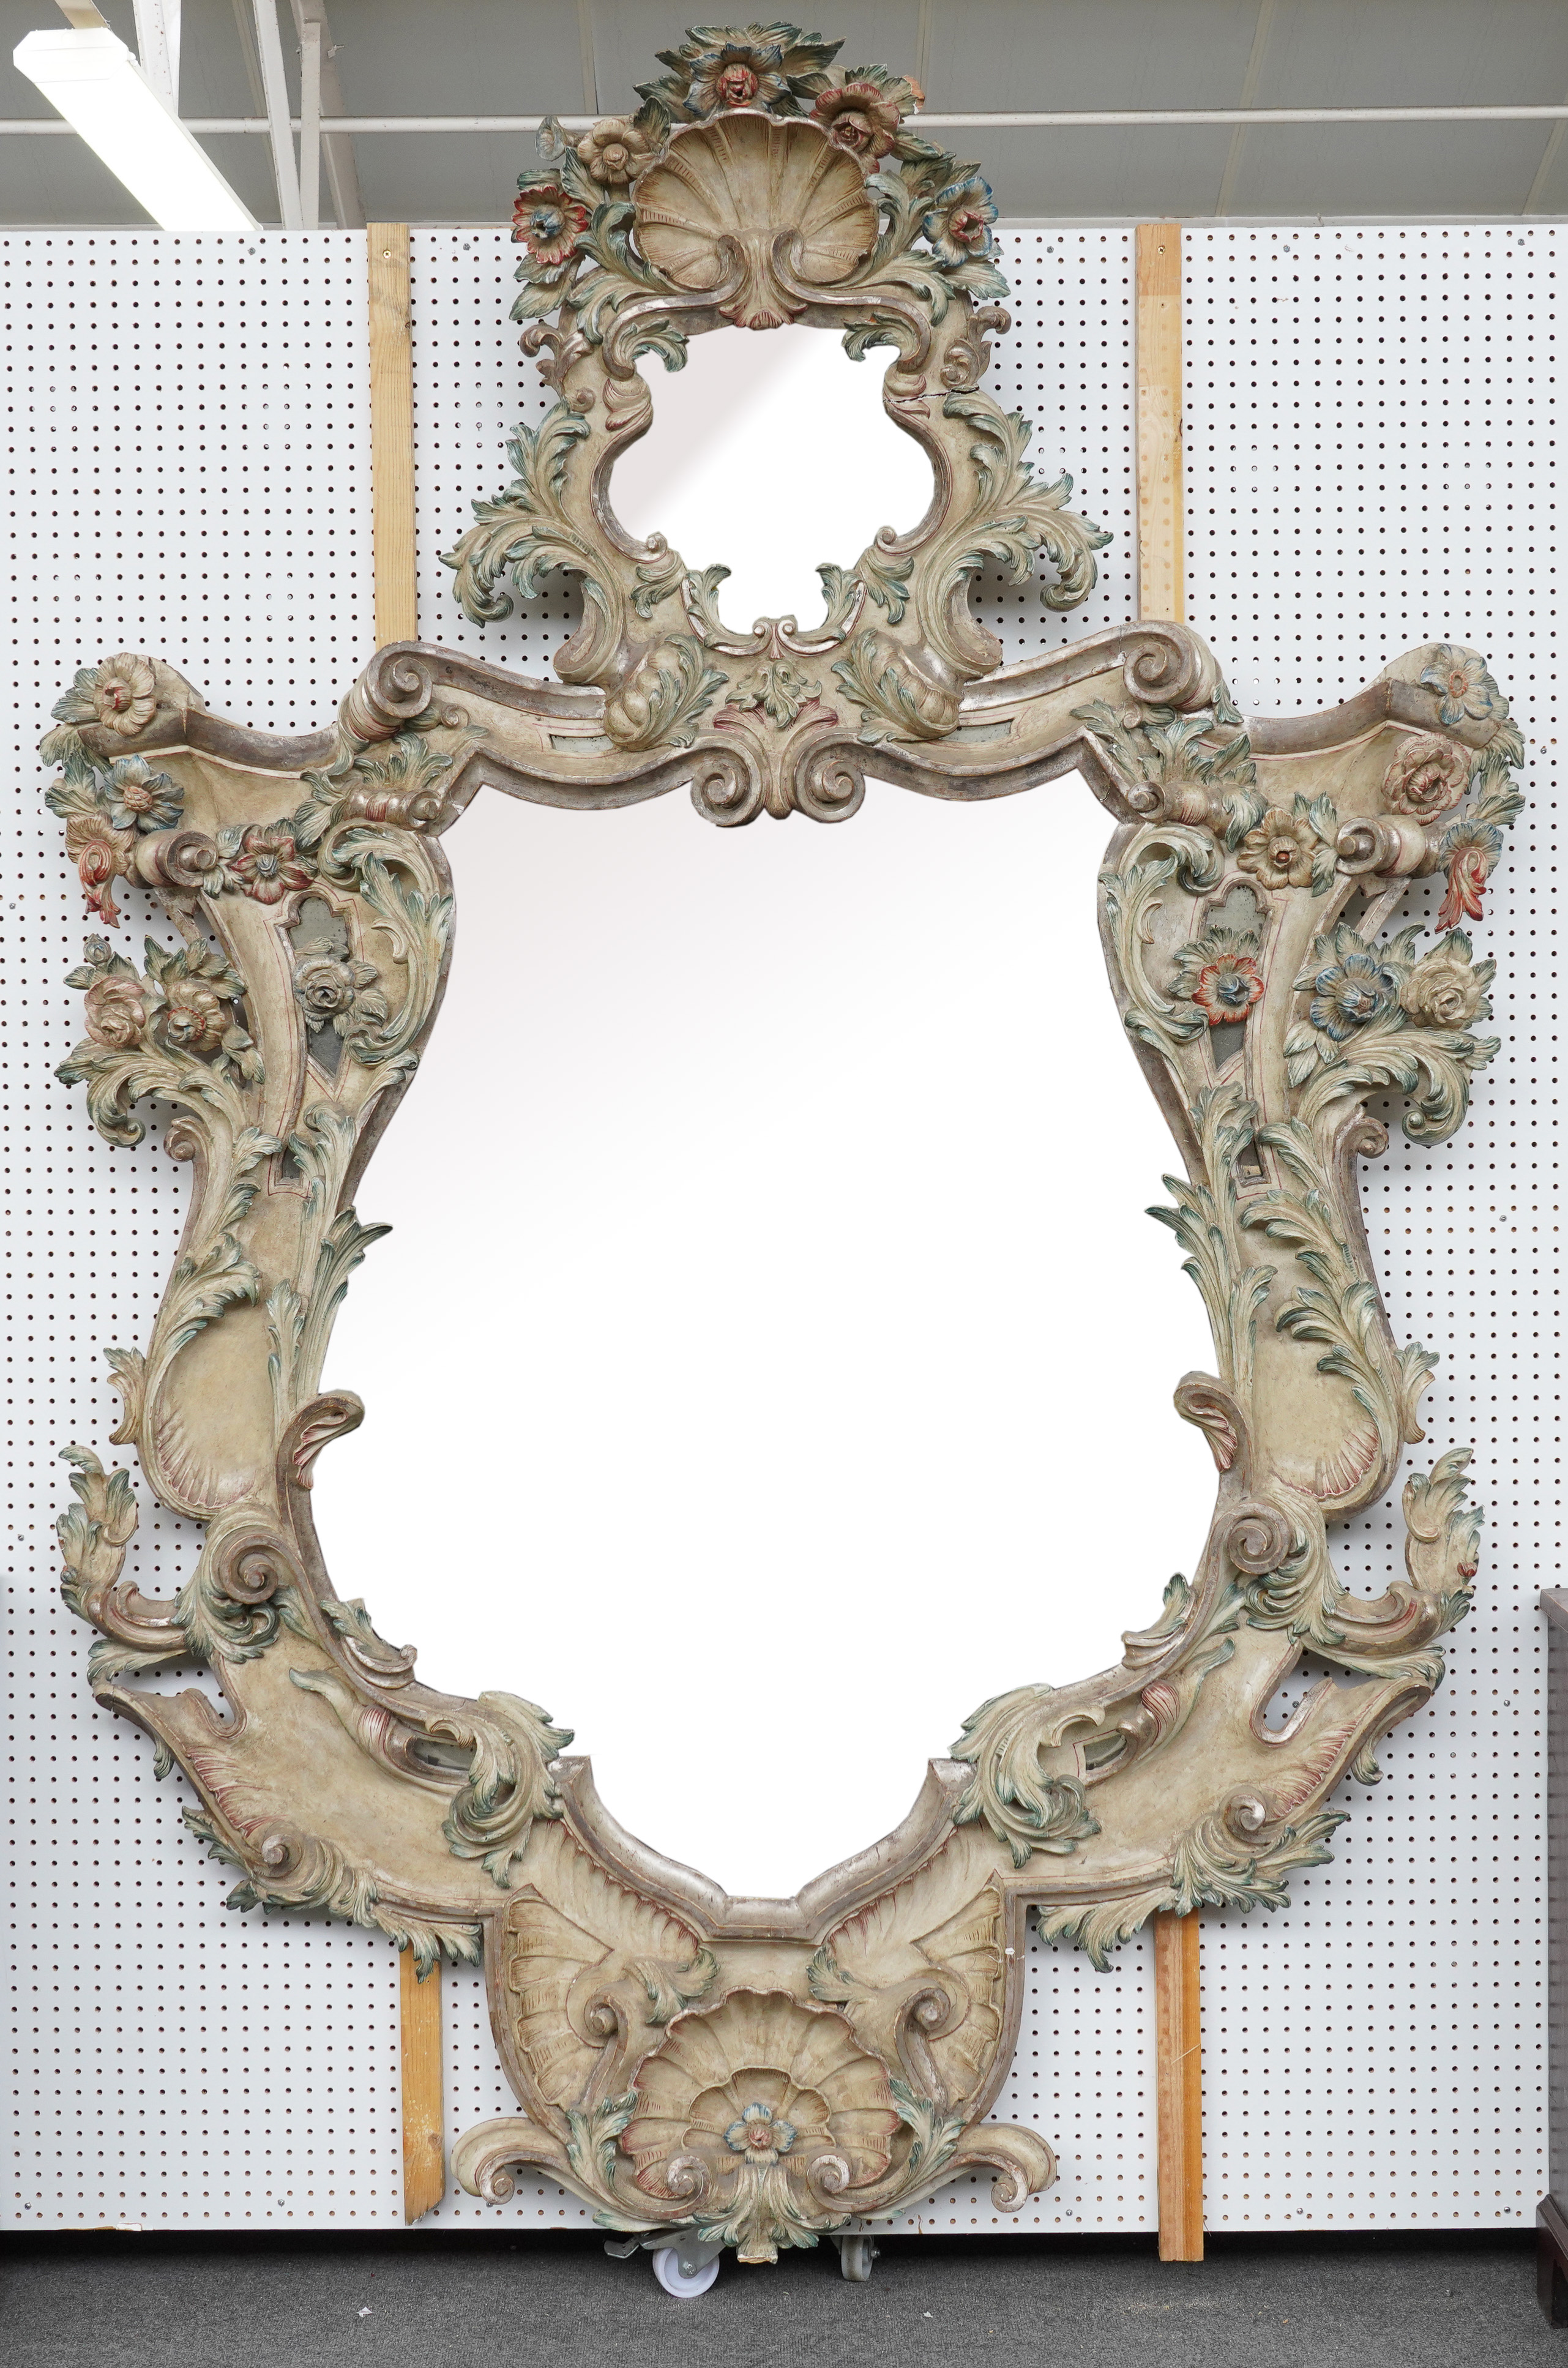 A LARGE 18TH CENTURY ITALIAN POLYCHROME PAINTED MIRROR